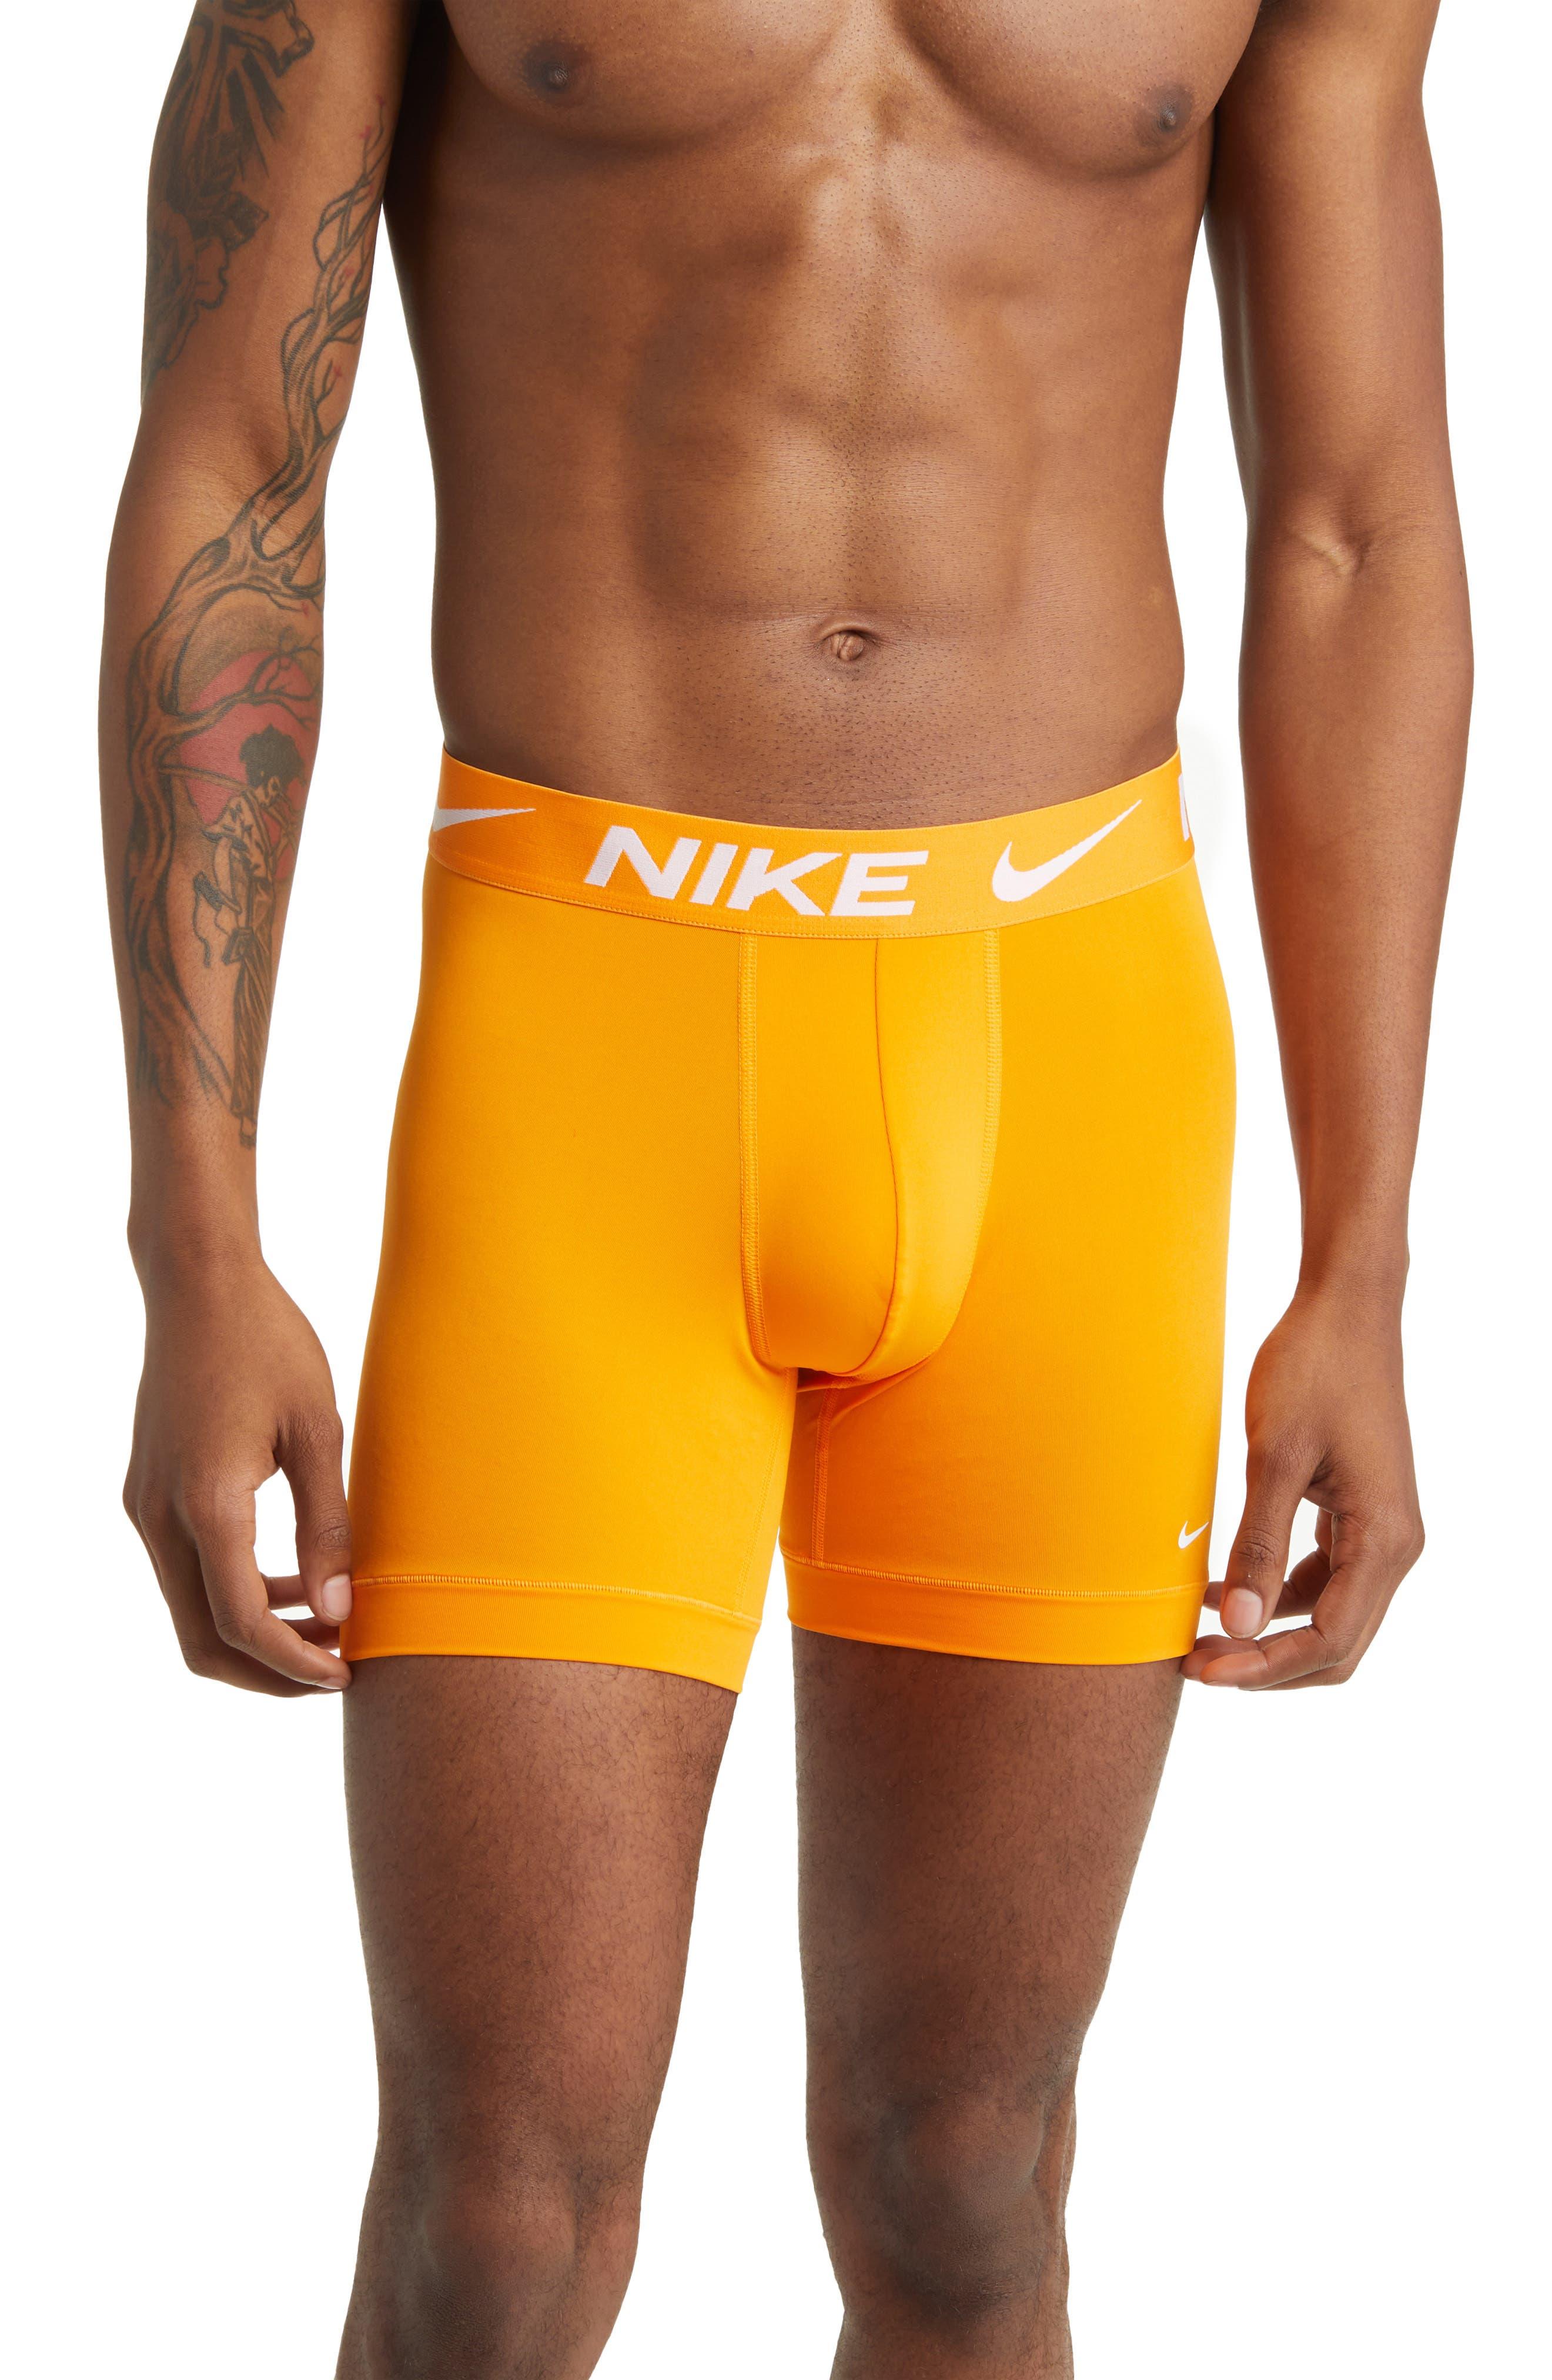 Nike Dri-FIT Essential Micro 3 pack boxer briefs in green/yellow/black